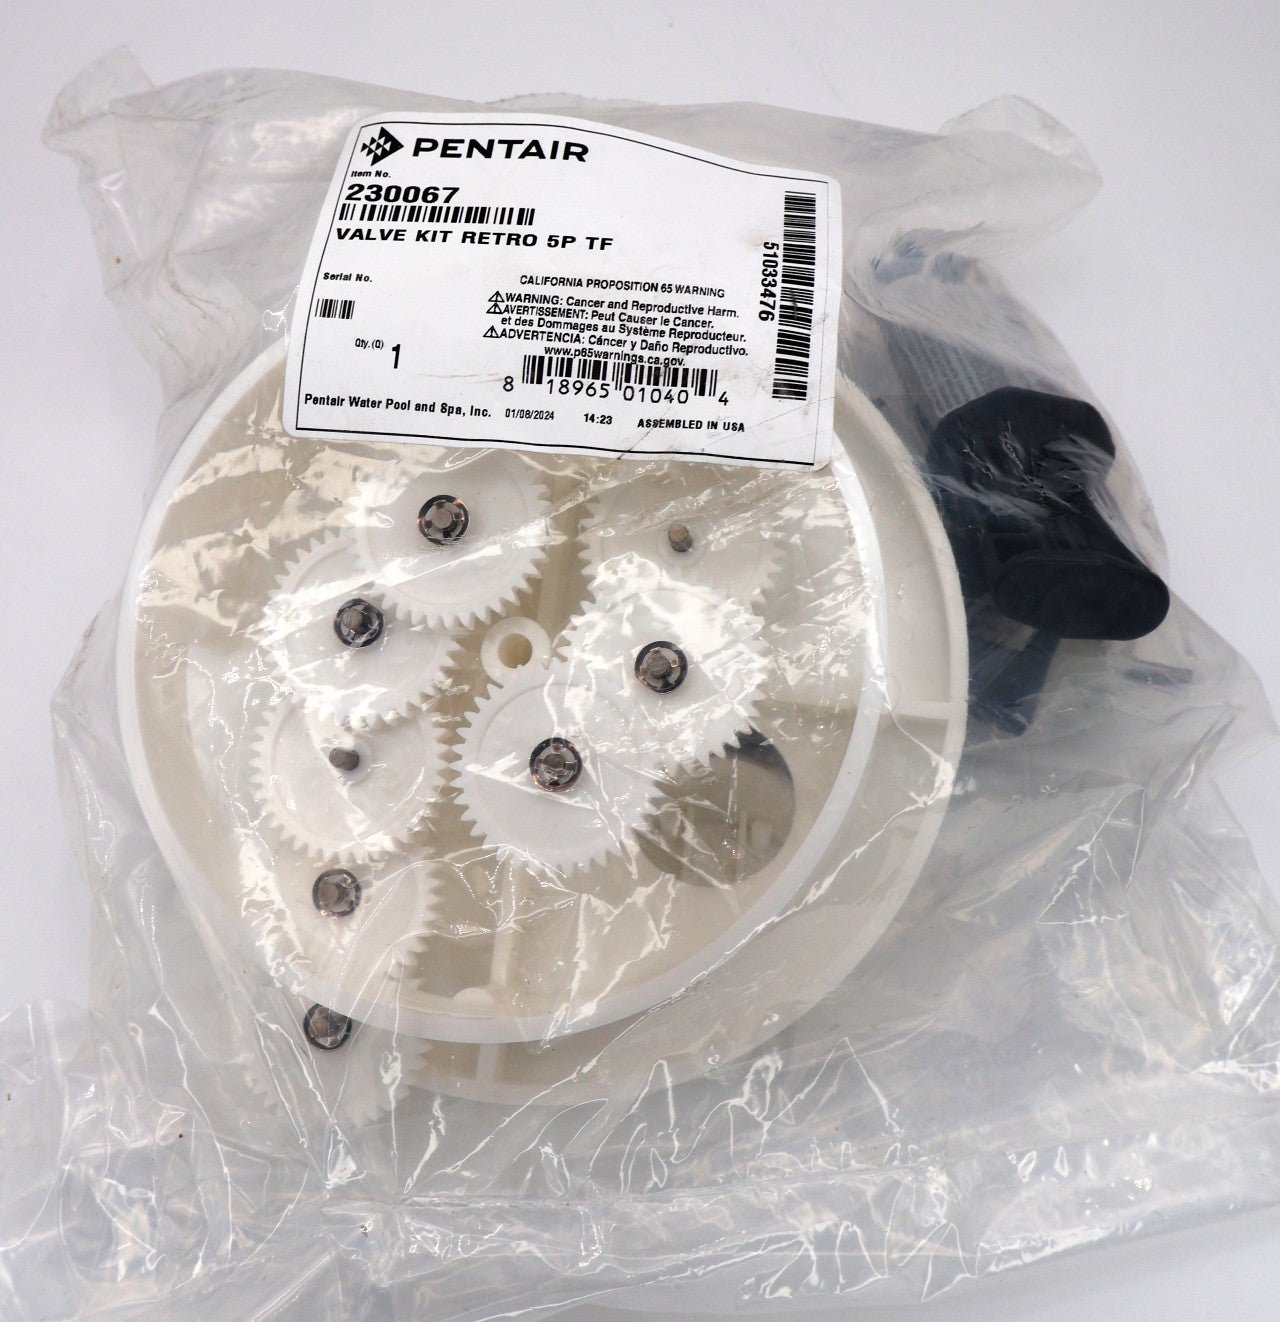 Pentair In-Floor (A&A) Top Feed Complete 5 Port T-Valve Retro-Fit Rebuild Gear Kit 230067 - In Floor Cleaning System Valve Parts - img-6